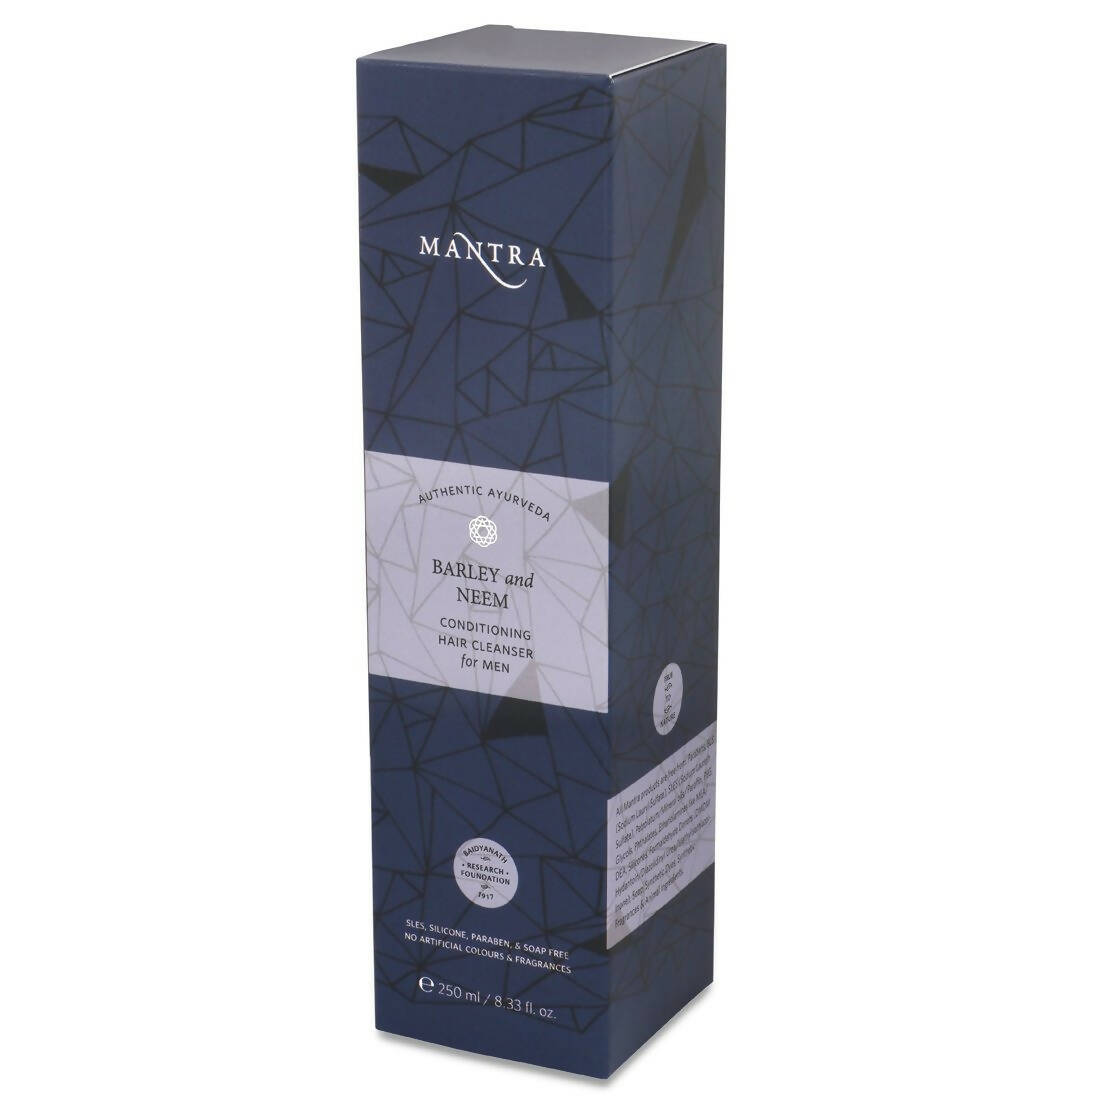 Mantra Herbal Barley and Neem Conditioning Hair Cleanser For Men